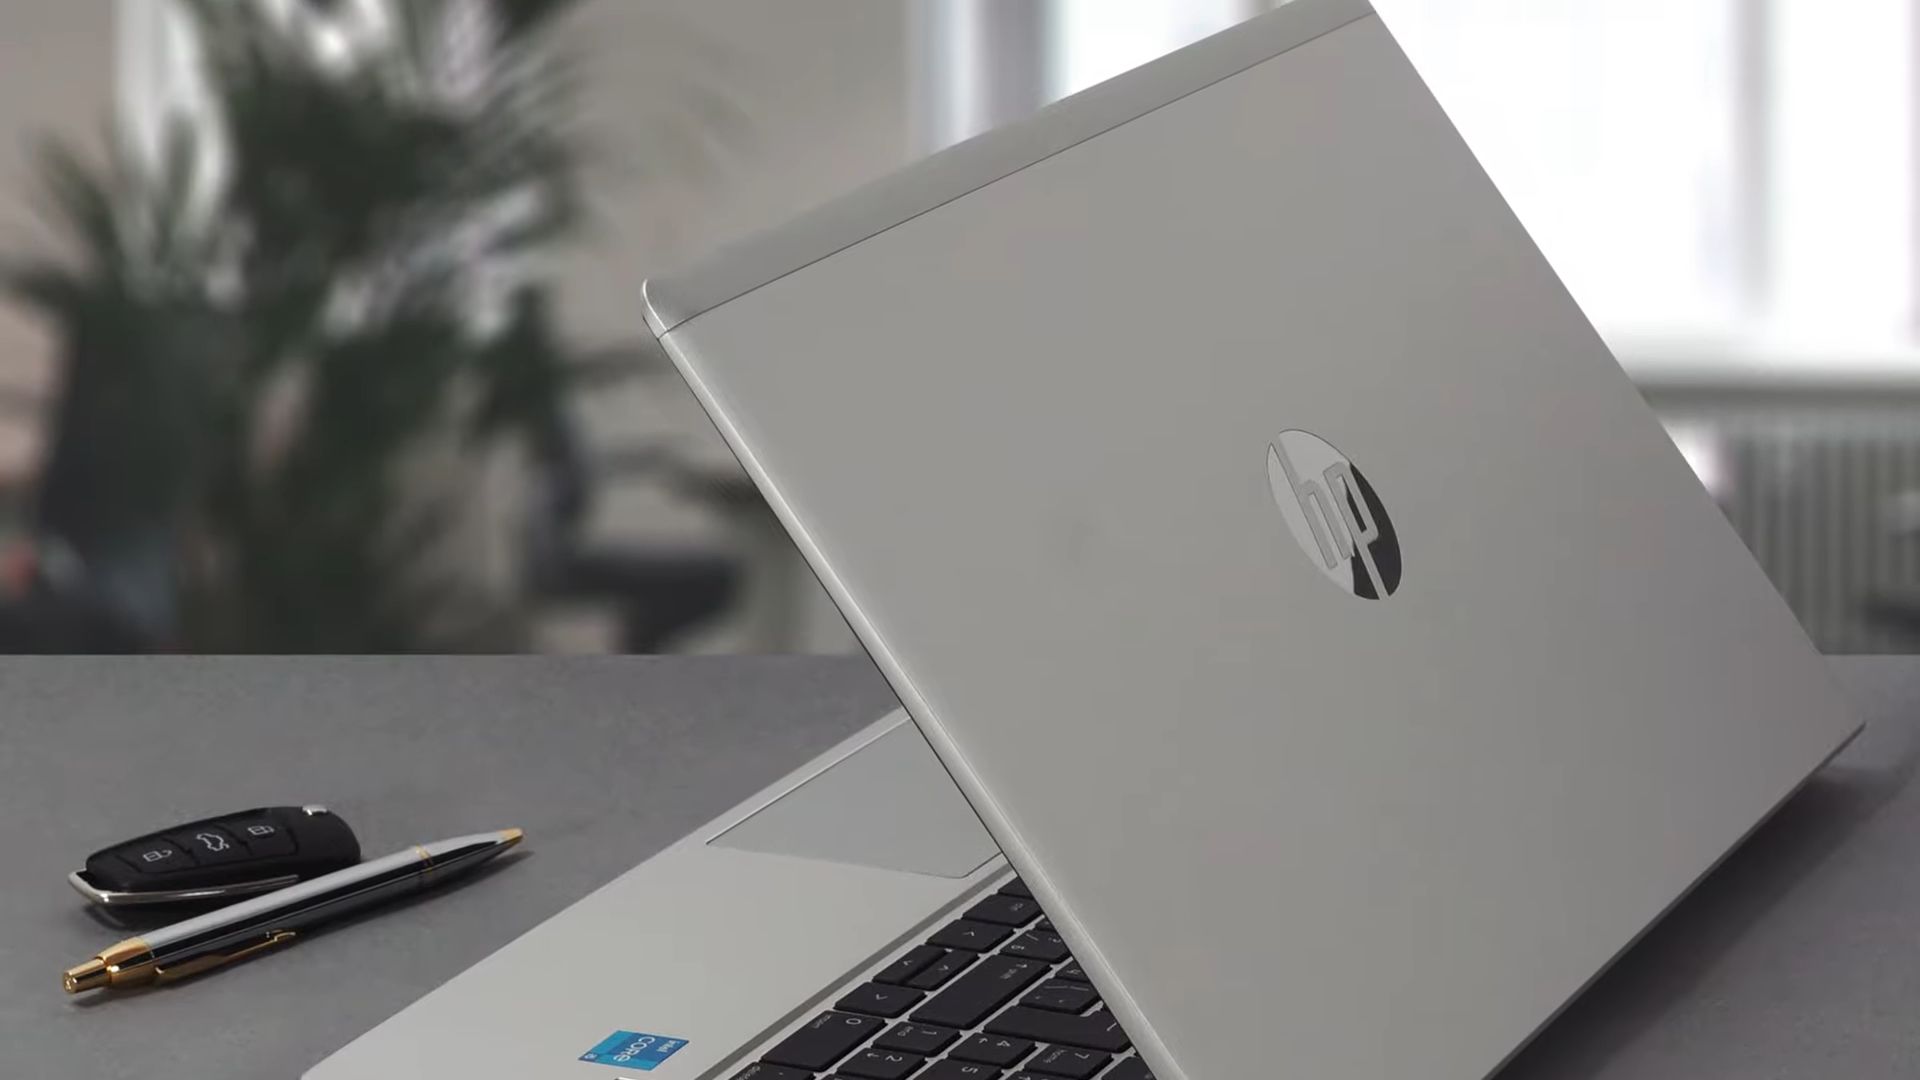 Which one to choose - HP ProBook 450 G8  or HP Pavilion 13?